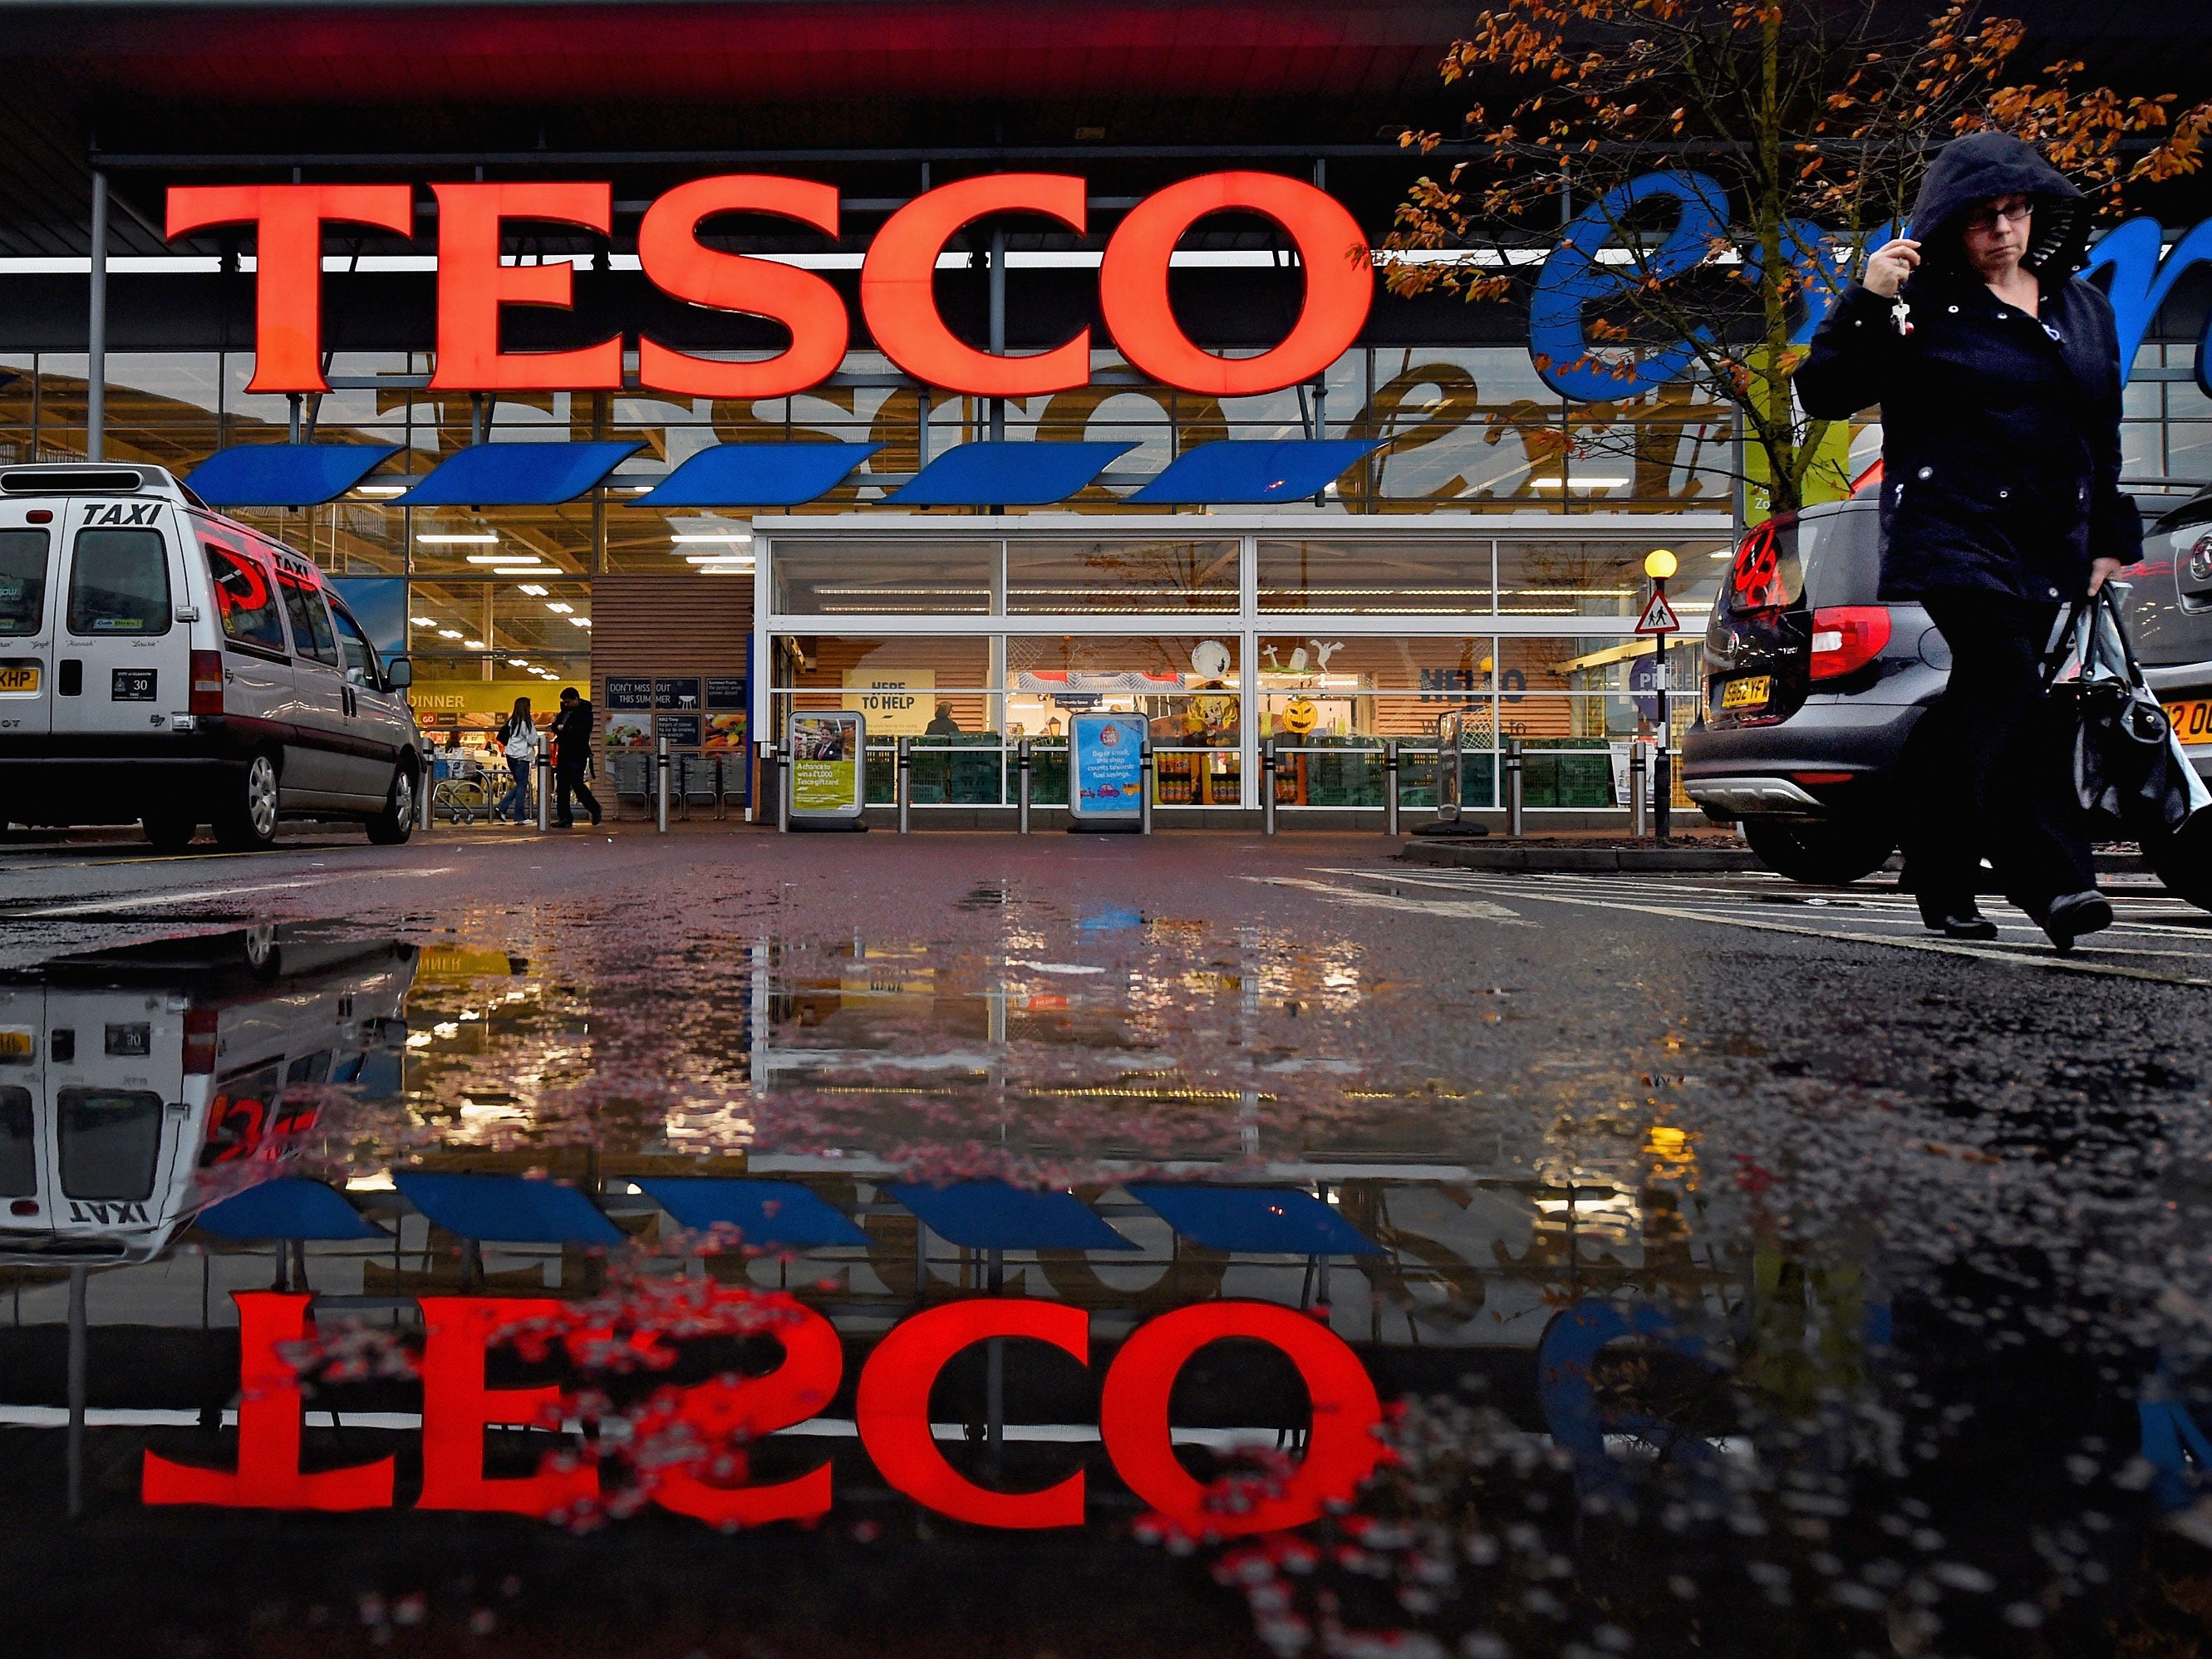 Tesco’s new boss Dave Lewis has decided to buy out Euphorium completely